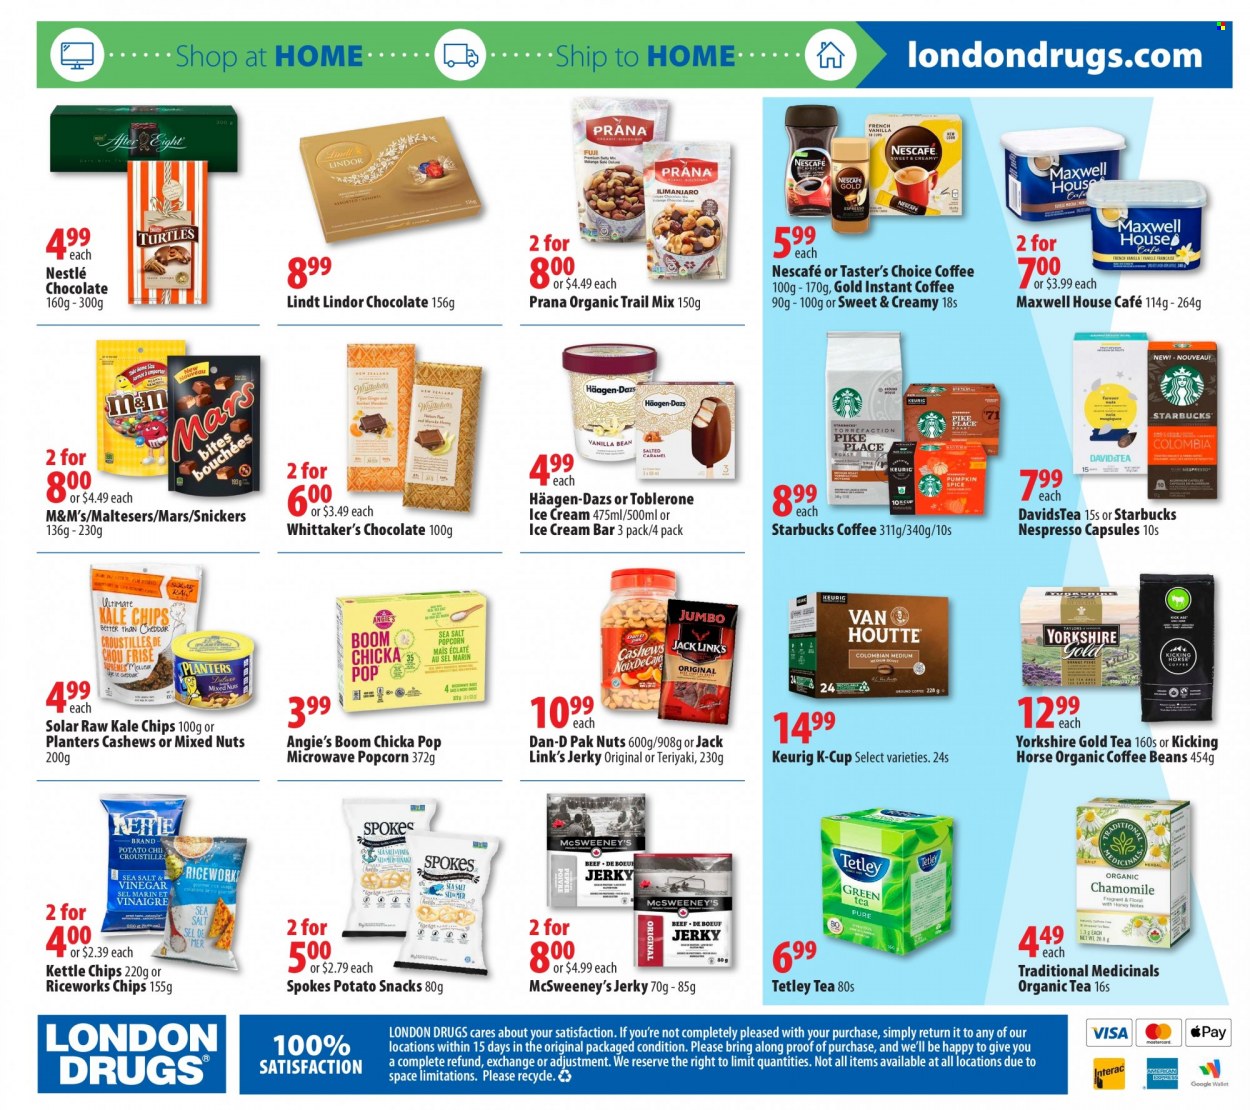 thumbnail - London Drugs Flyer - October 07, 2021 - October 13, 2021 - Sales products - Snickers, Mars, Toblerone, Maltesers, Whittaker's, kale, kettle, popcorn, Jack Link's, beans, Dan-D Pak, cashews, mixed nuts, Planters, trail mix, Maxwell House, tea, Nespresso, coffee capsules, Starbucks, K-Cups, Keurig, Nestlé, chips, Lindt, Lindor, Nescafé, M&M's. Page 20.